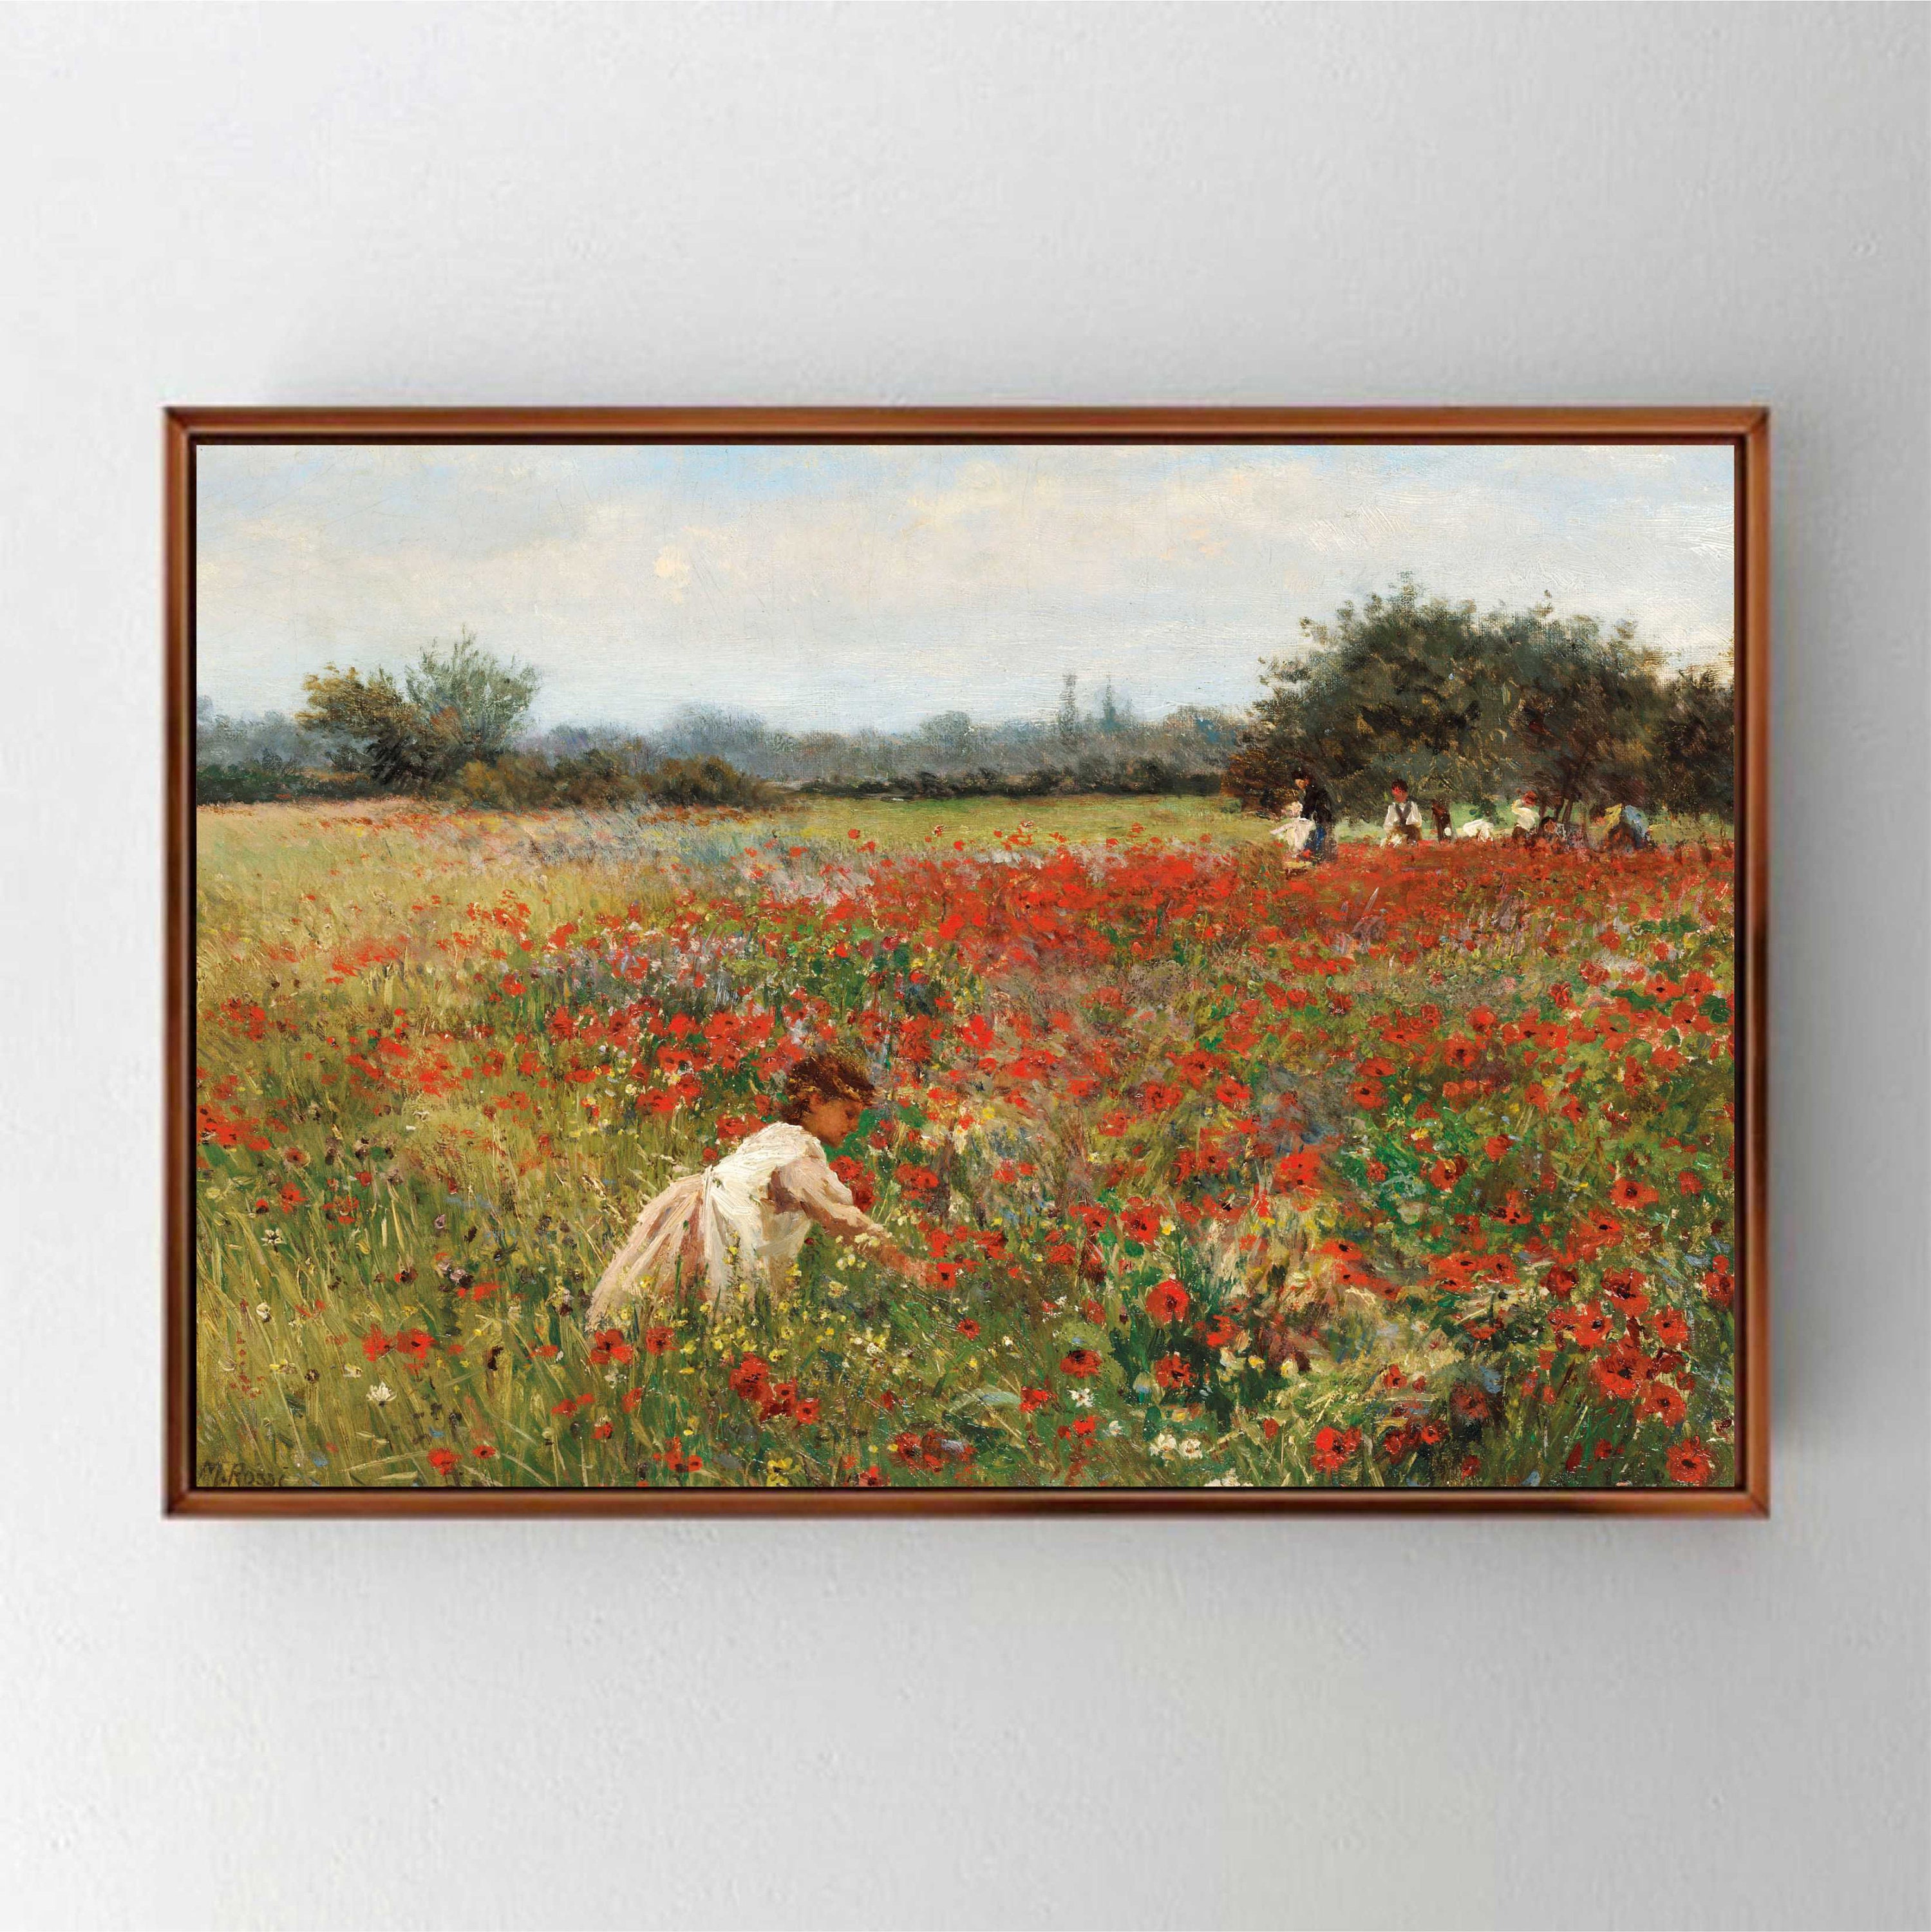 Modern Wall Art Floating Frame Option Extra Large Canvas Wall Art Gathering Poppies Print on Canvas Alexander Mark Rossi